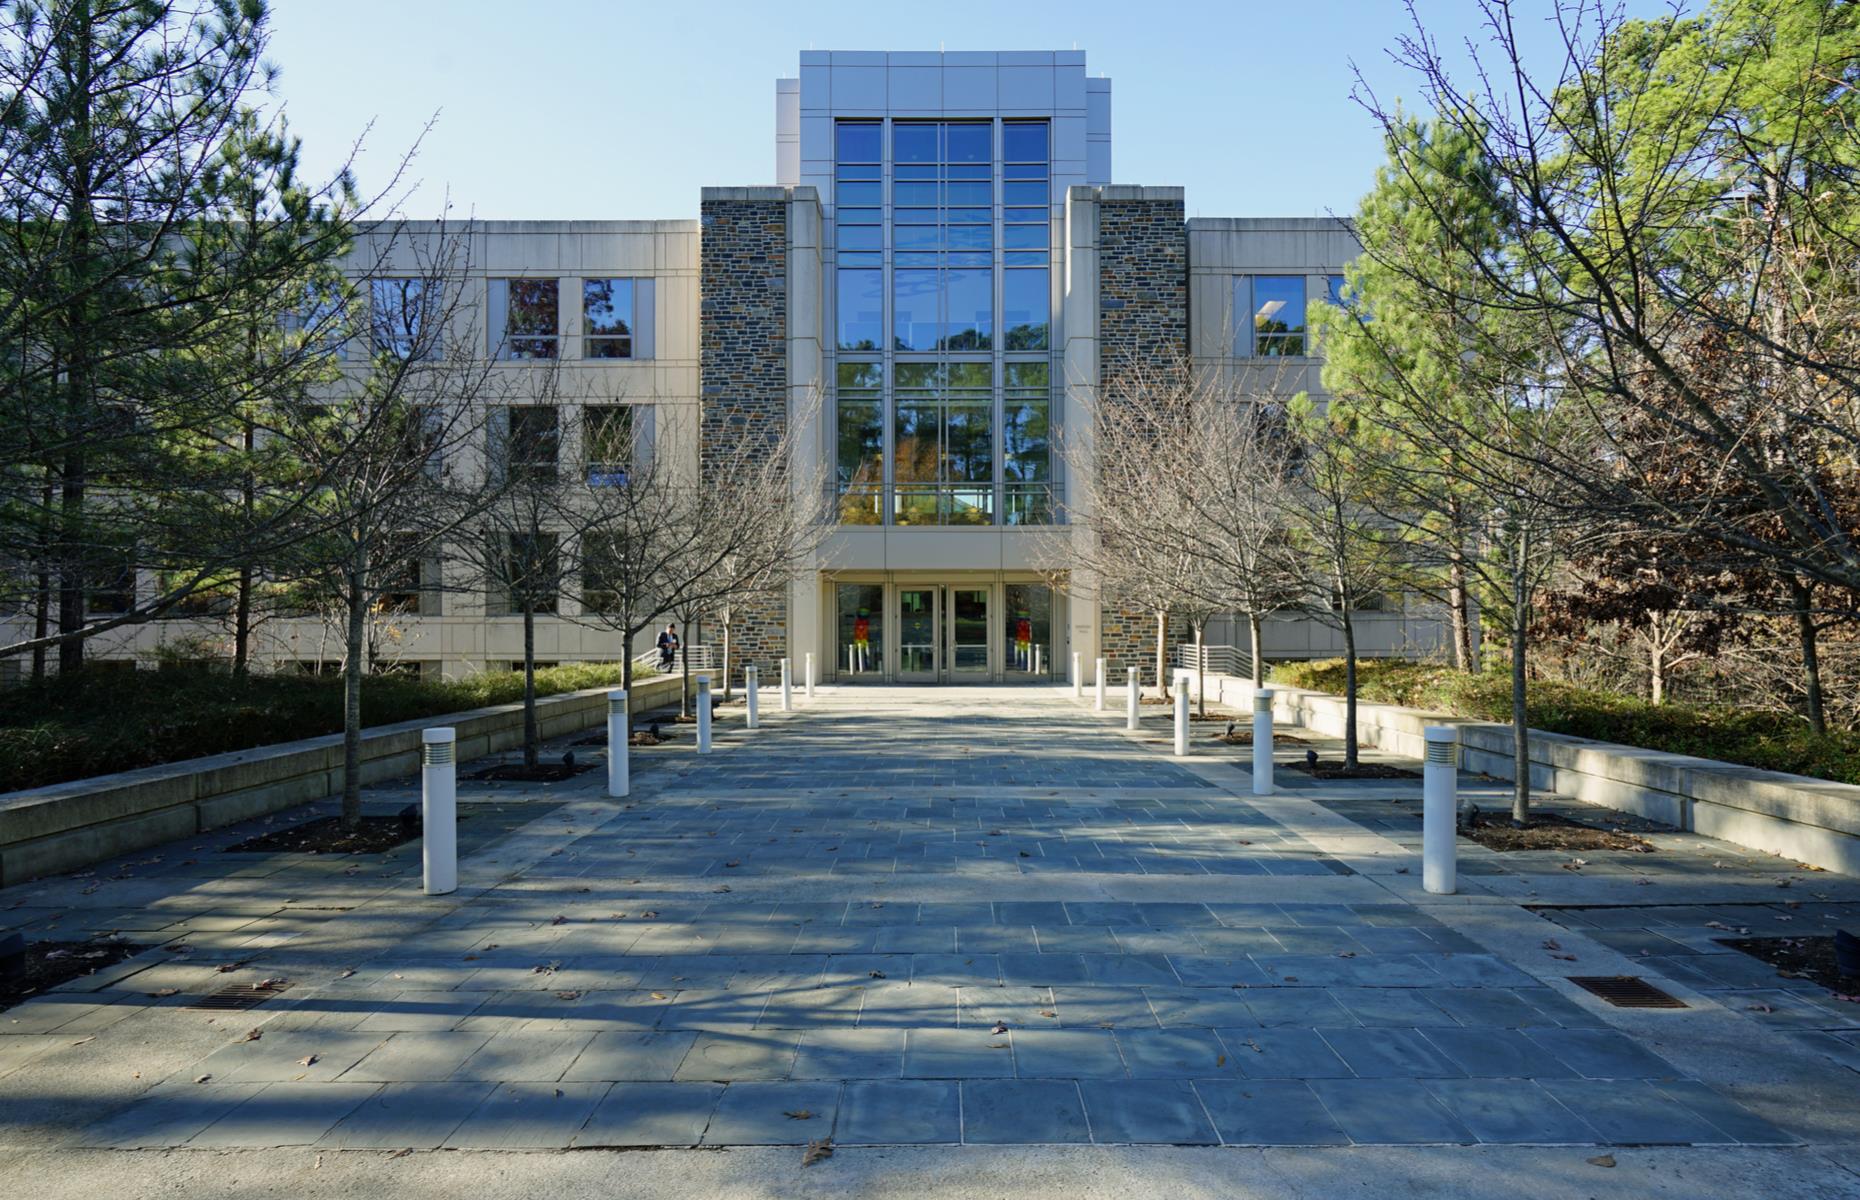 Joint 24. The Fuqua School of Business, USA